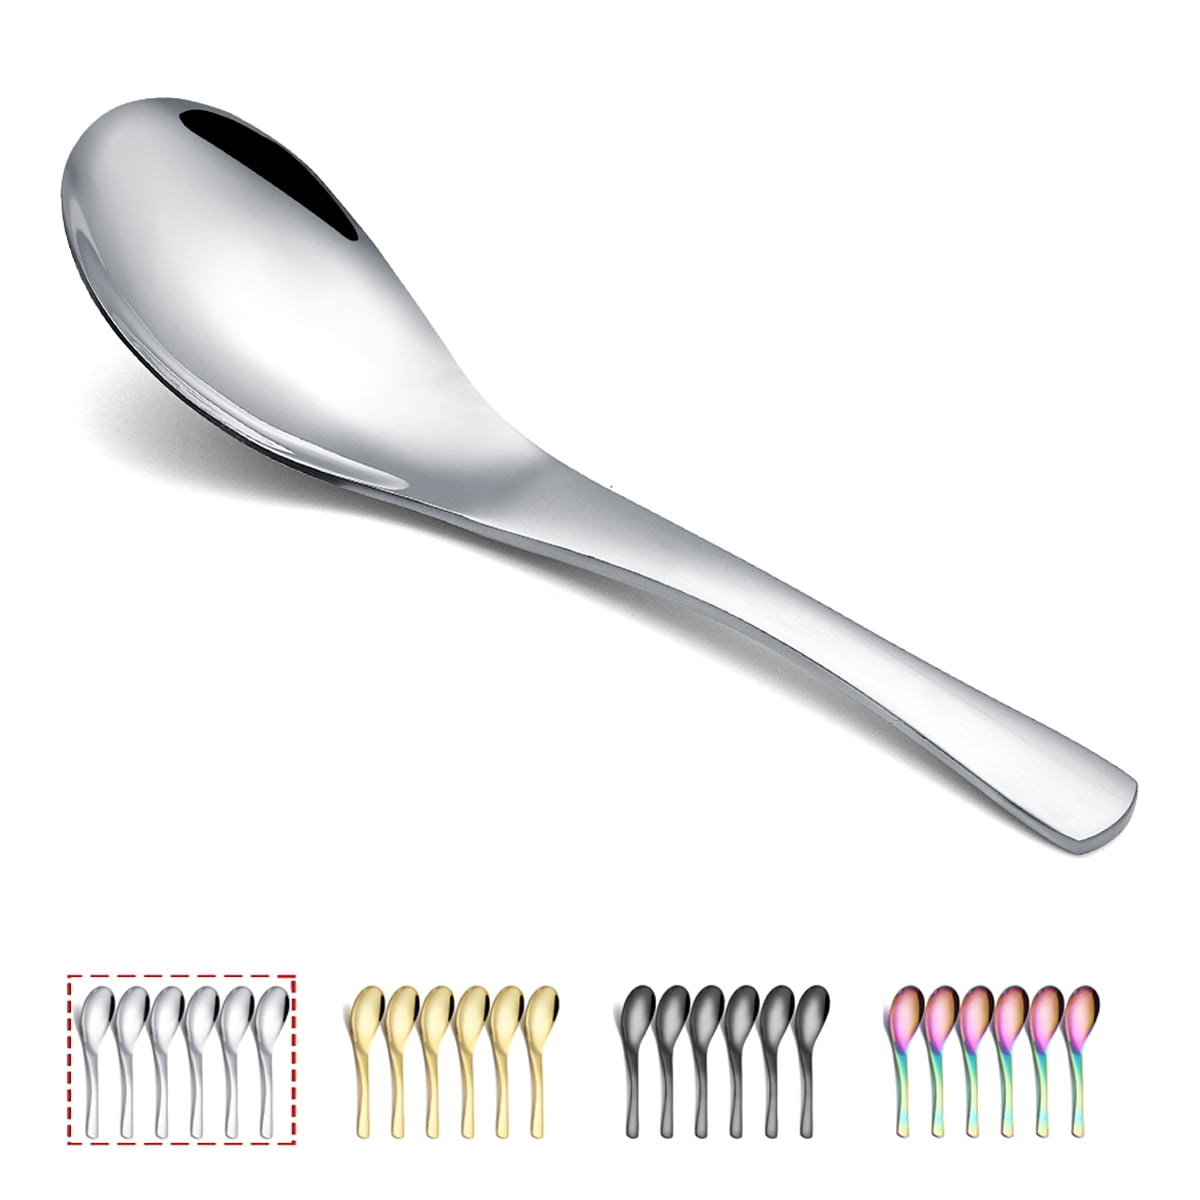 Stainless Steel Round Shape Dessert Soup Spoon Kitchen Cutlery Spoon Tool 